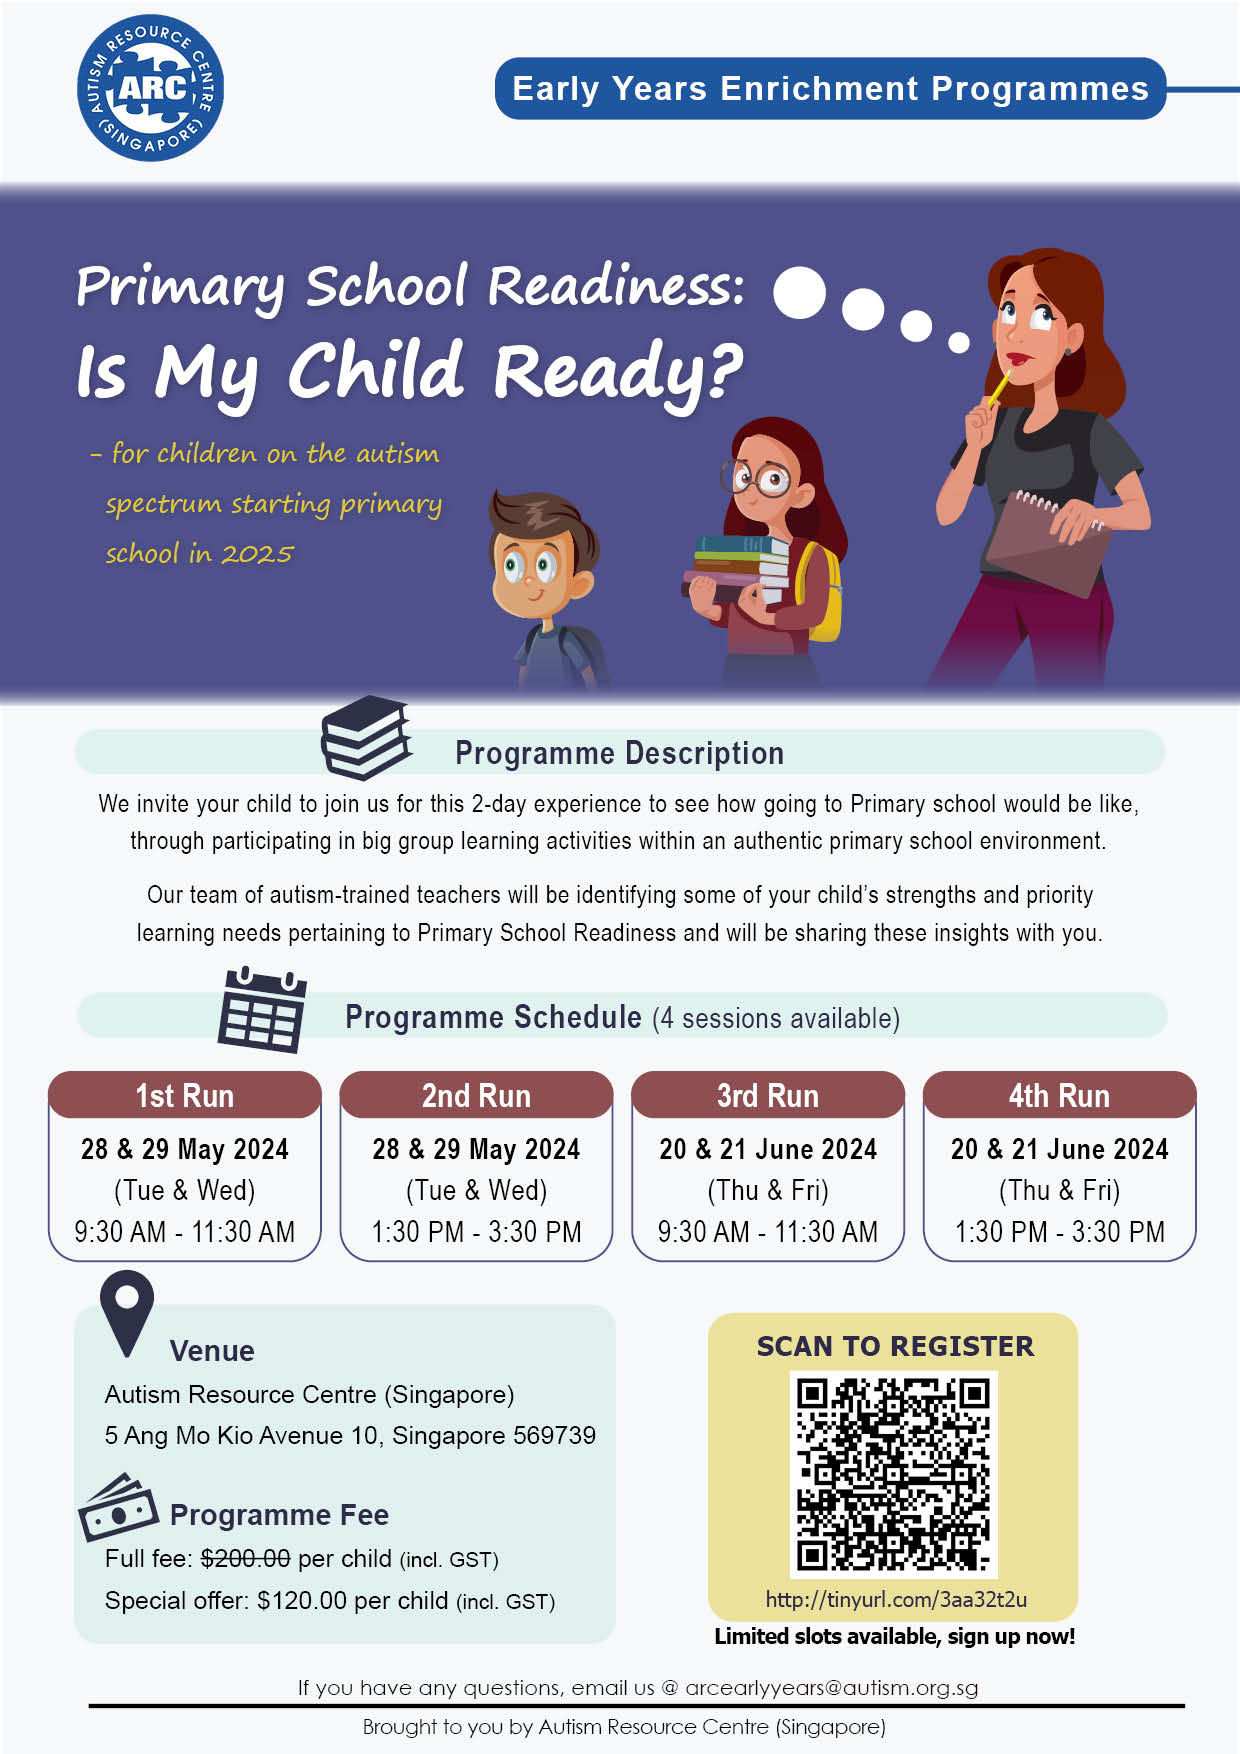 Primary School Readiness: Is My Child Ready?